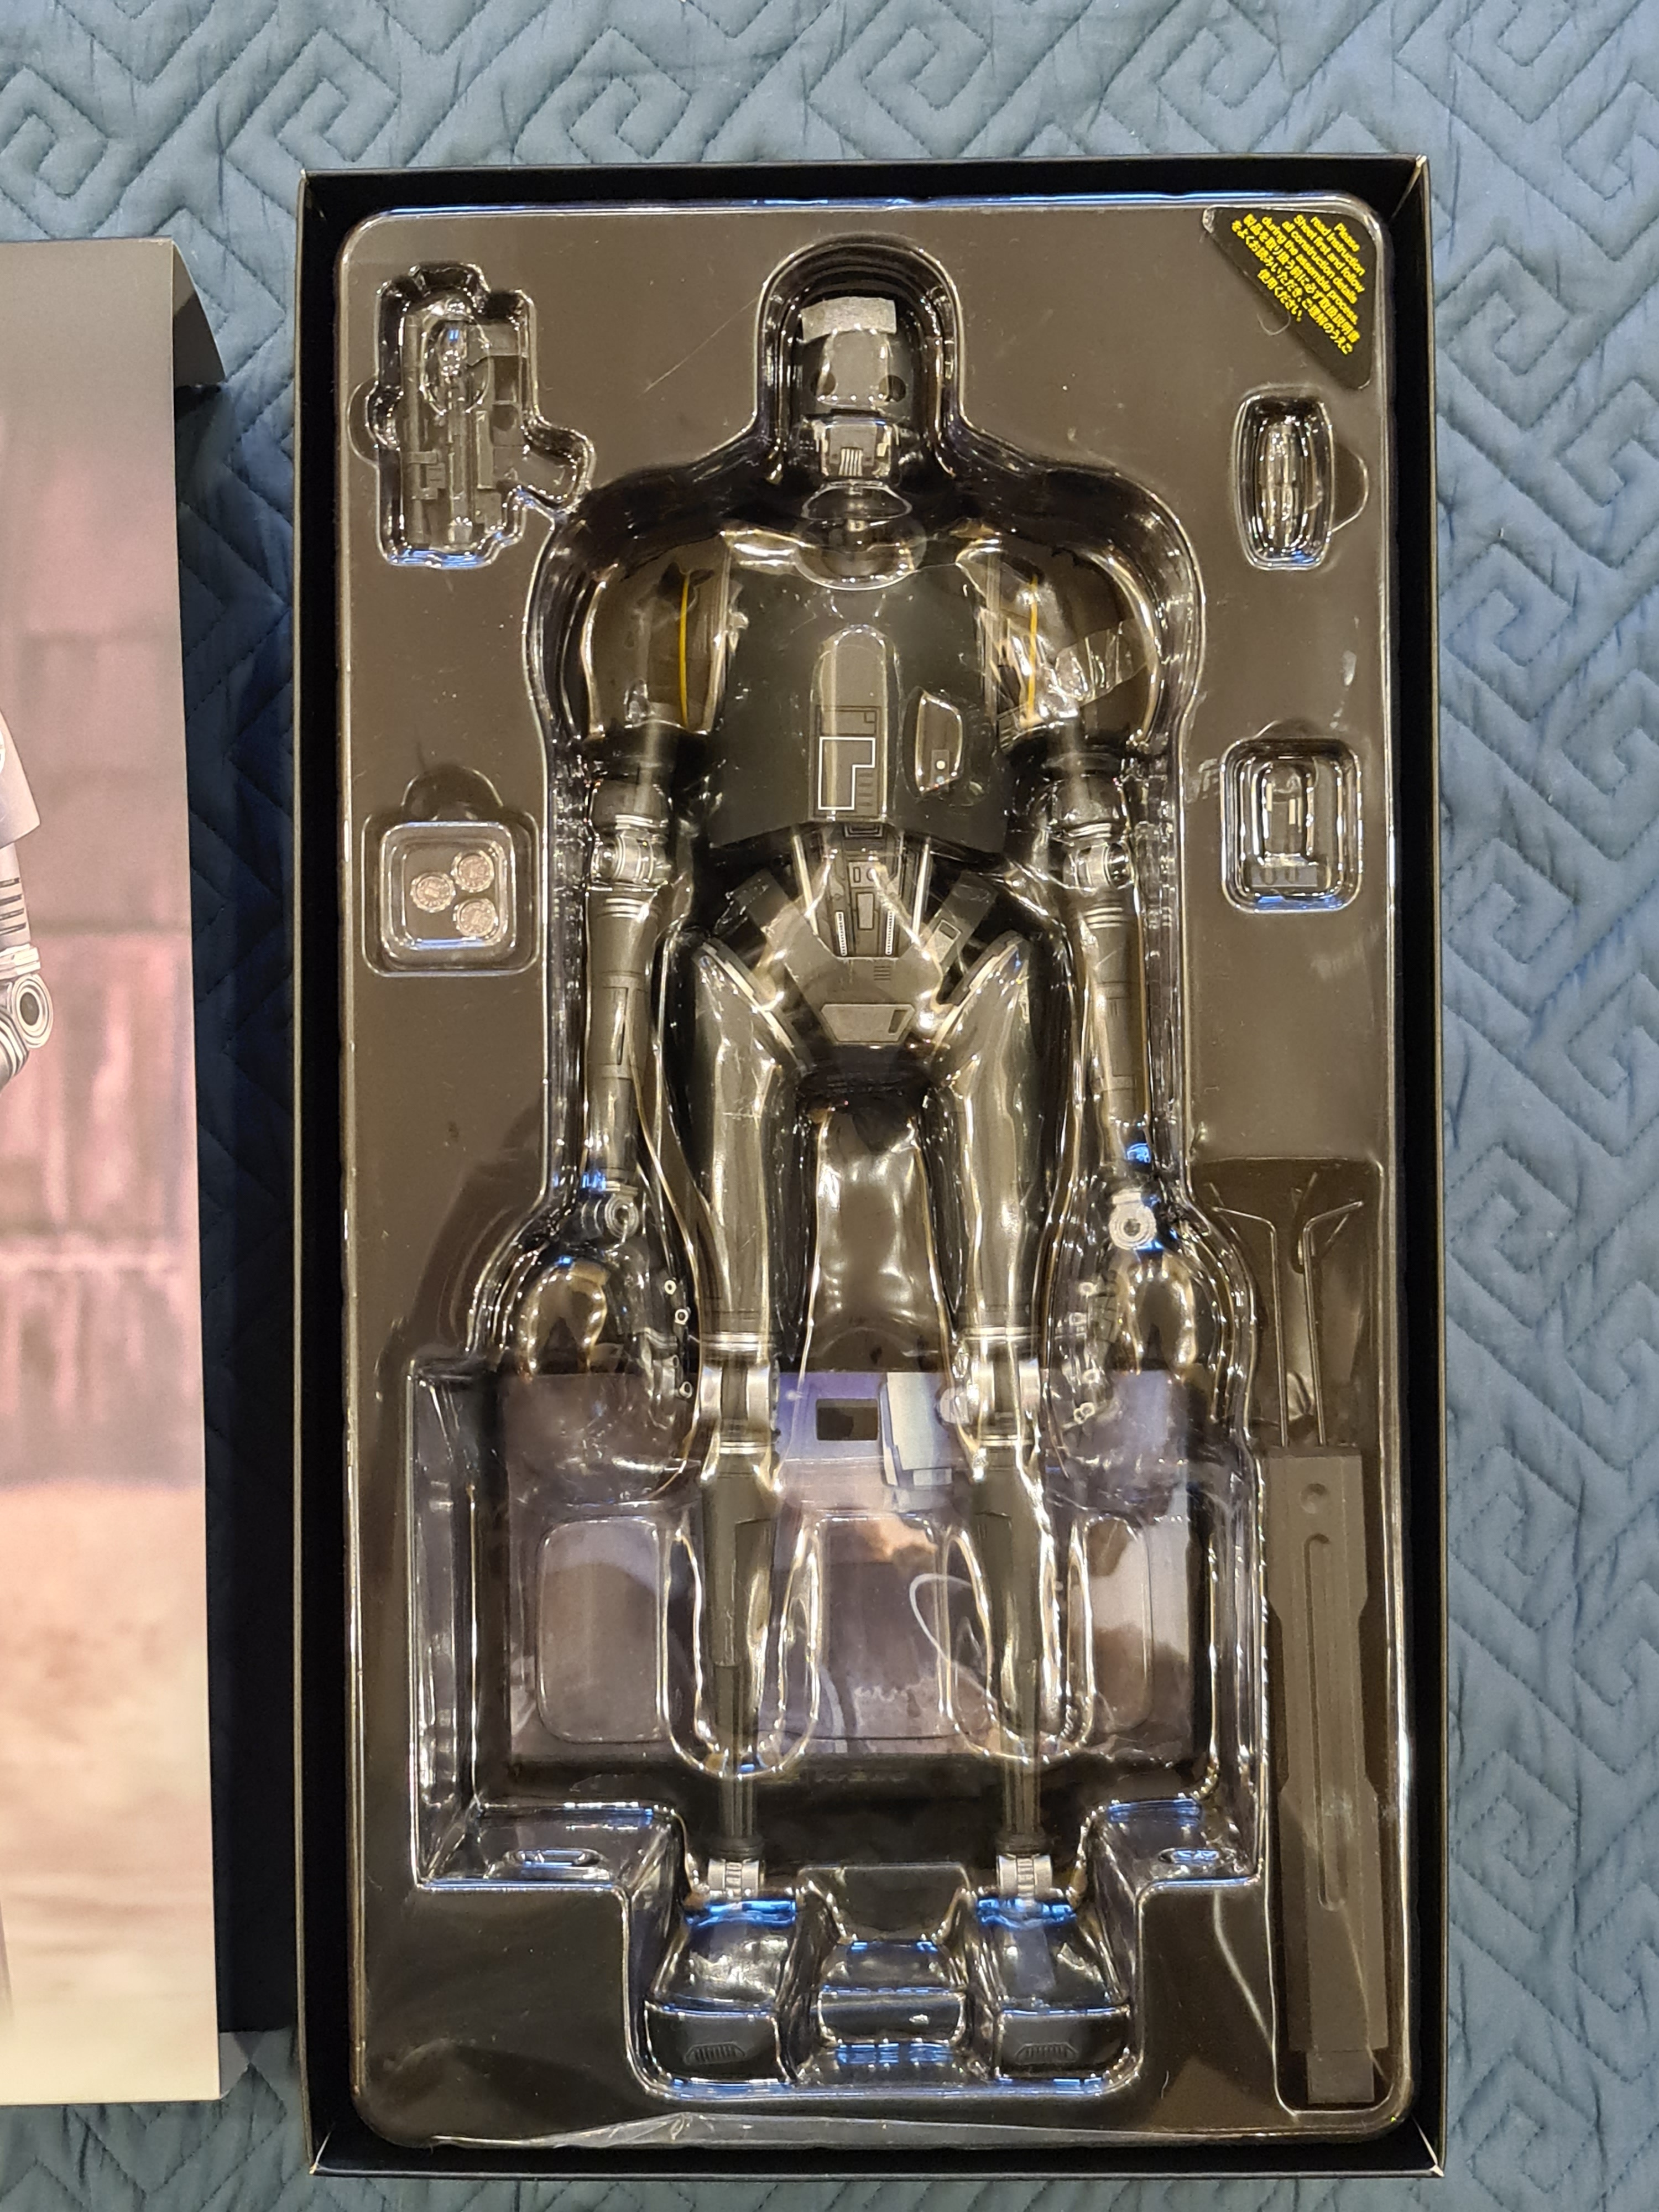 Hot Toys - K-2SO - 1:6 Scale Collectible - Rogue One: A Star Wars Story - Movie Masterpiece Series